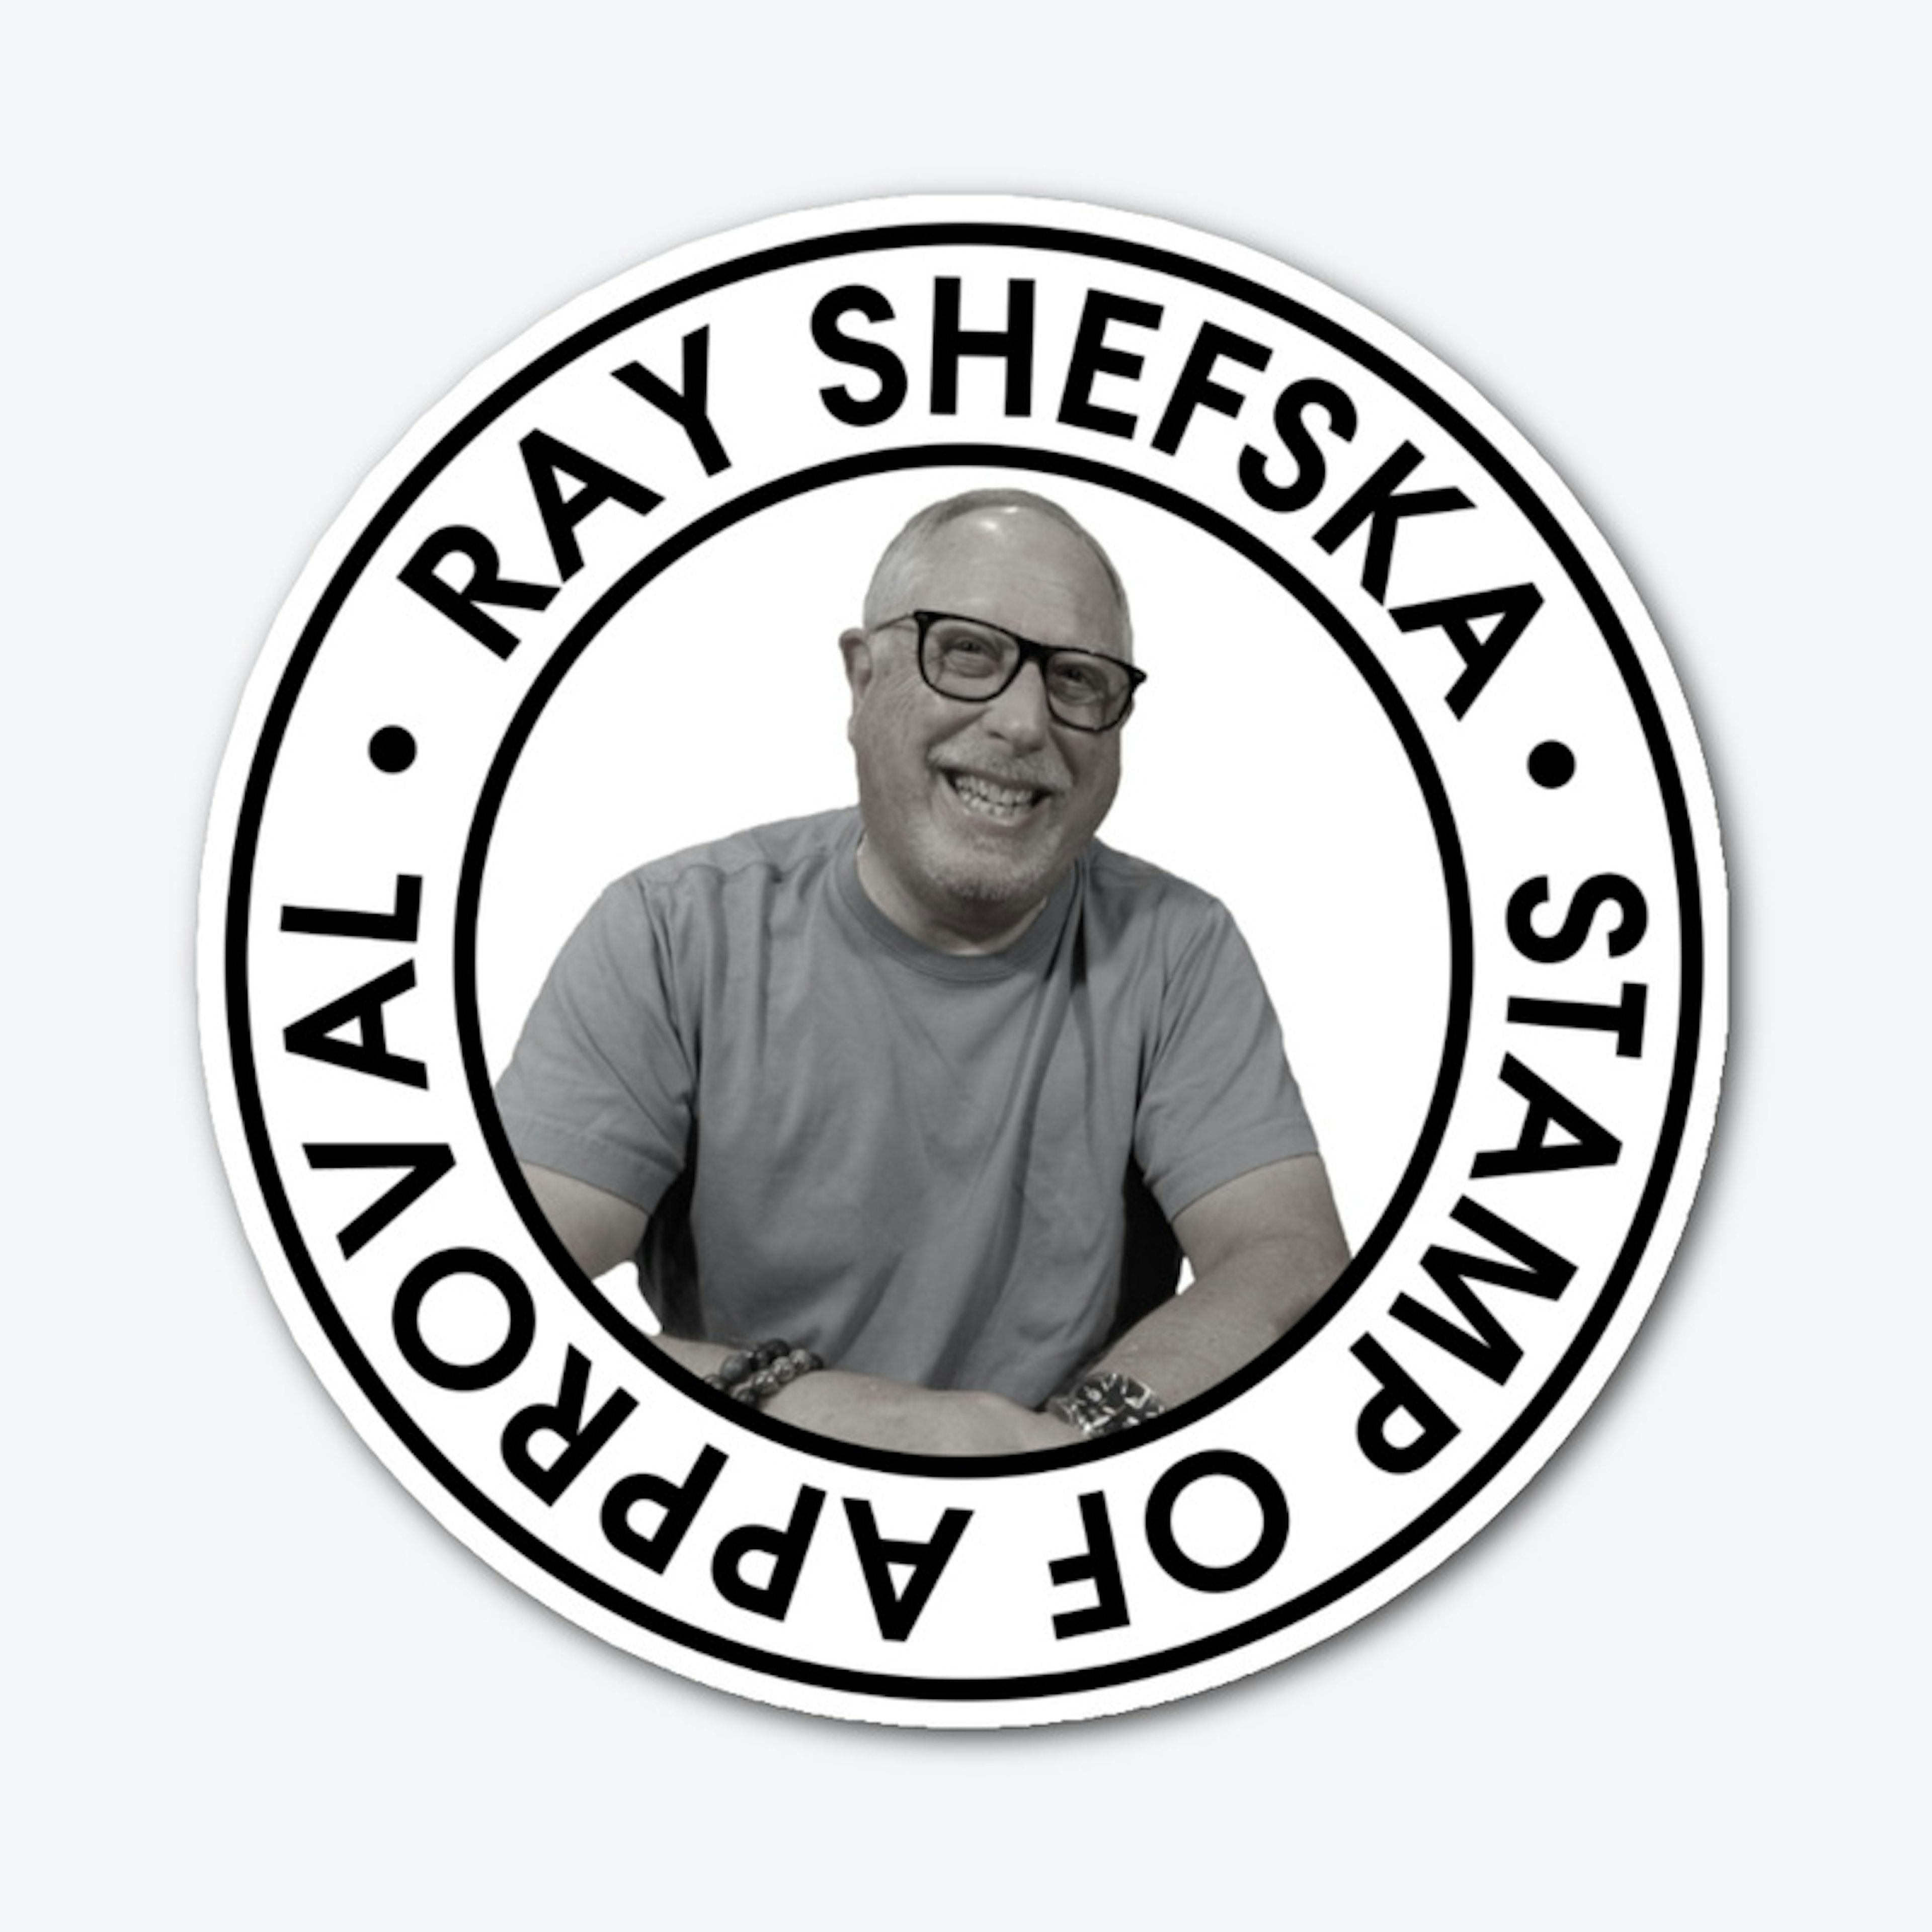 Ray Shefska "Stamp of Approval"